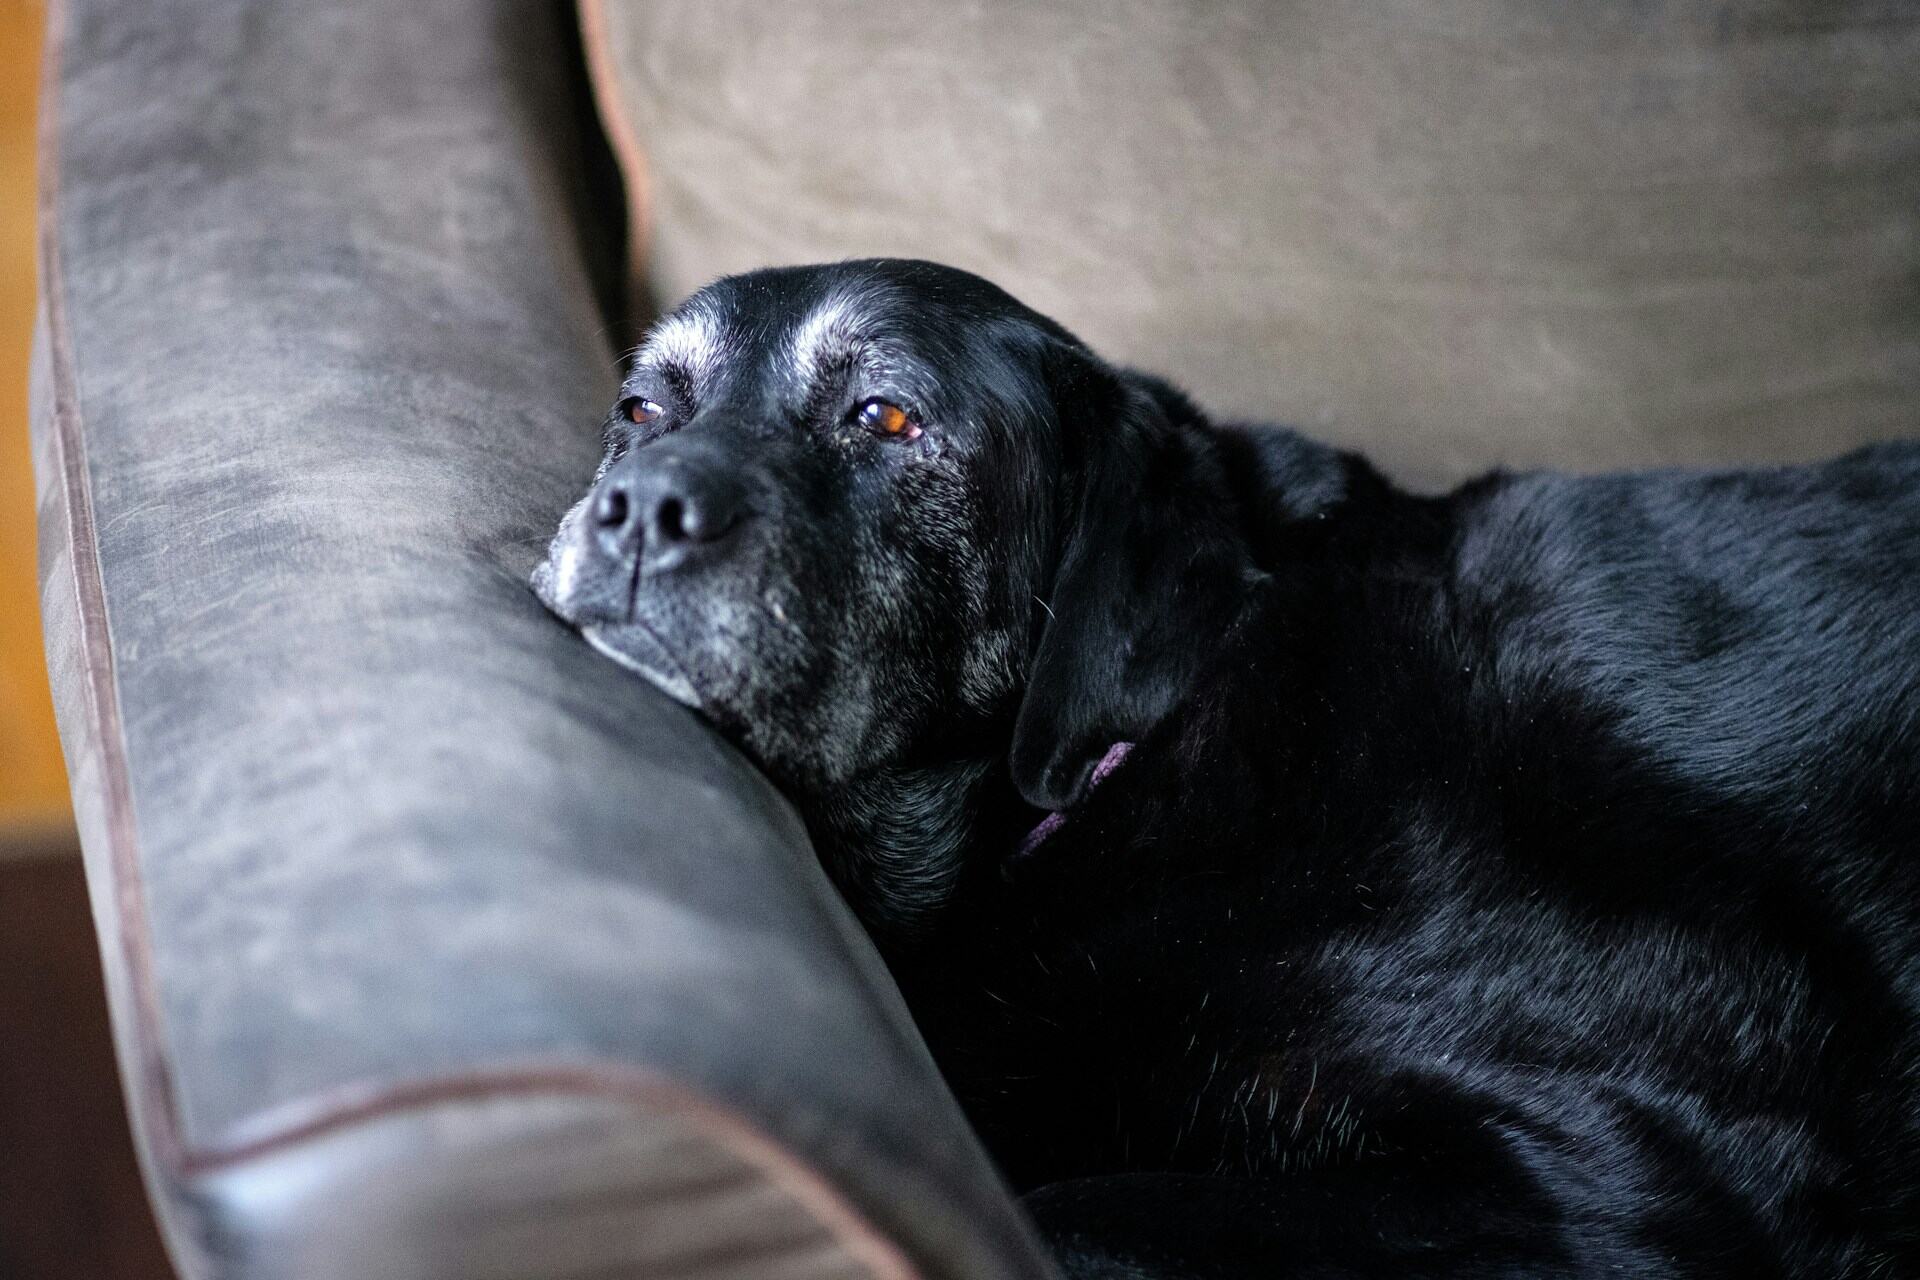 A senior dog lying on a couch